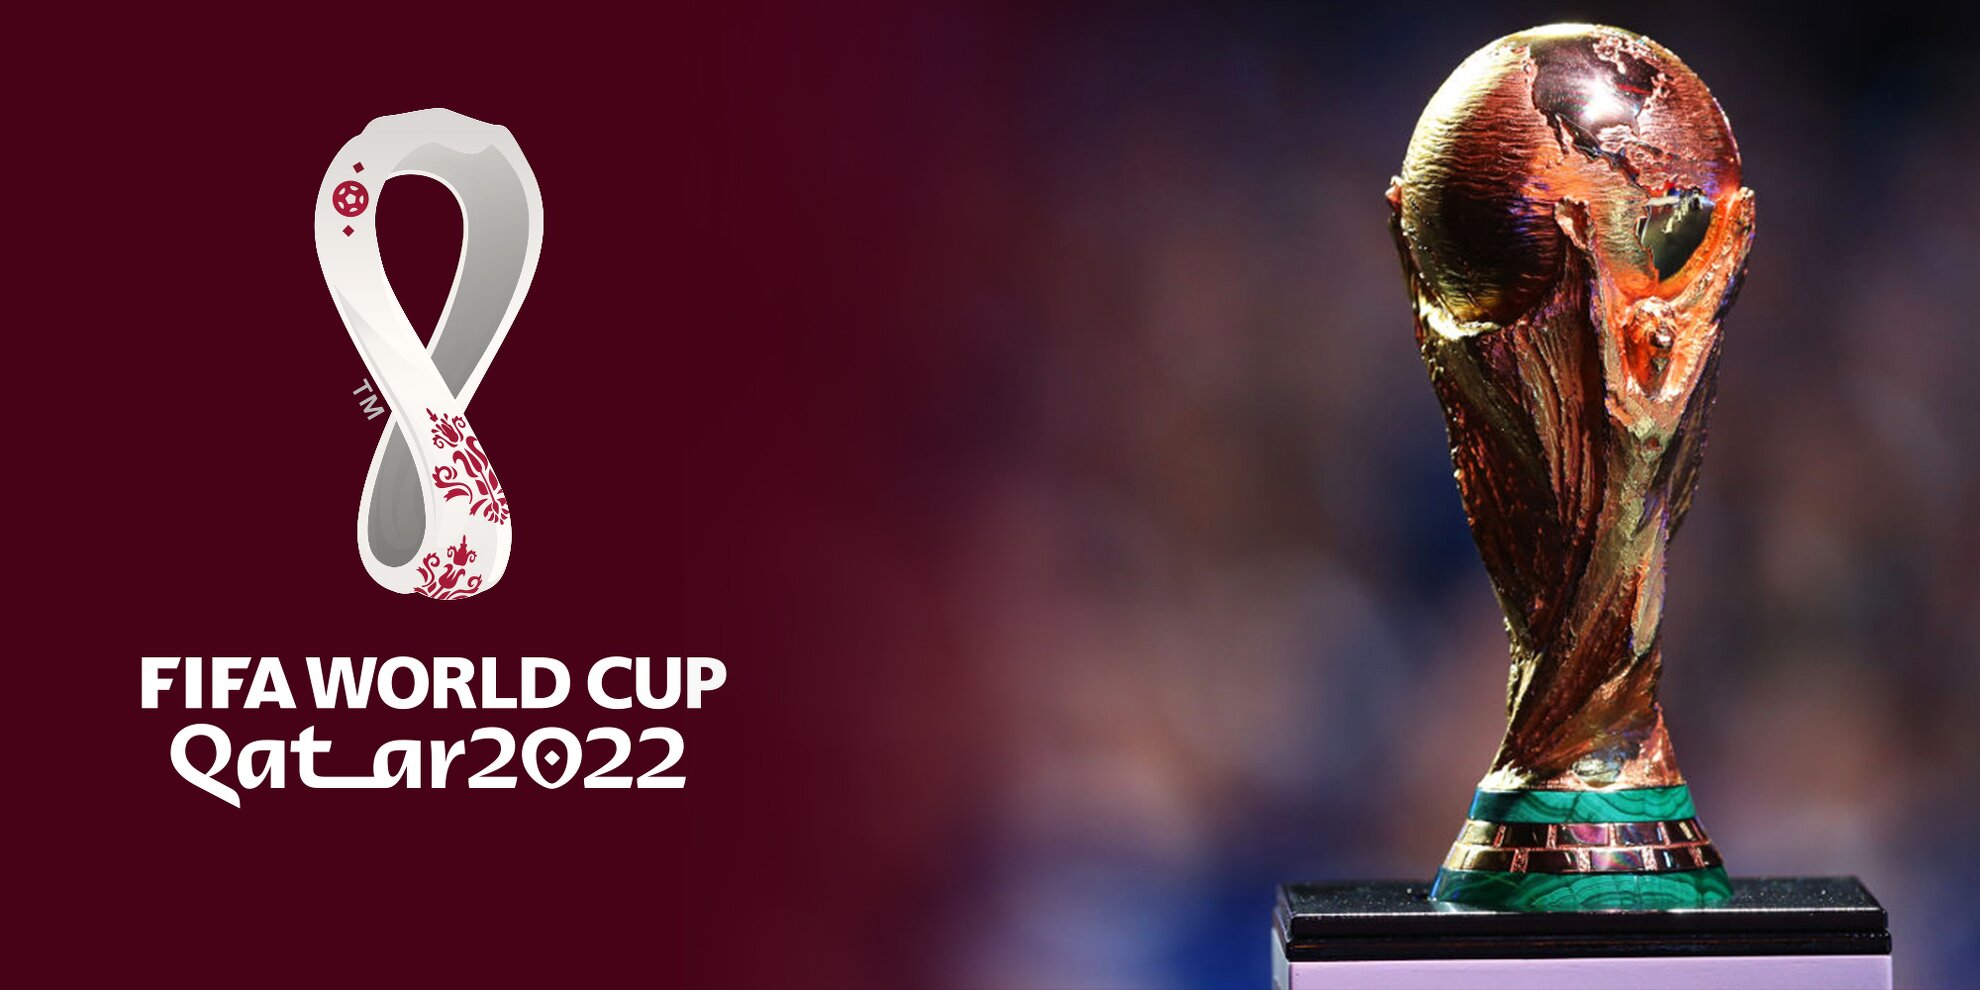 When will the 2022 FIFA World Cup take place?